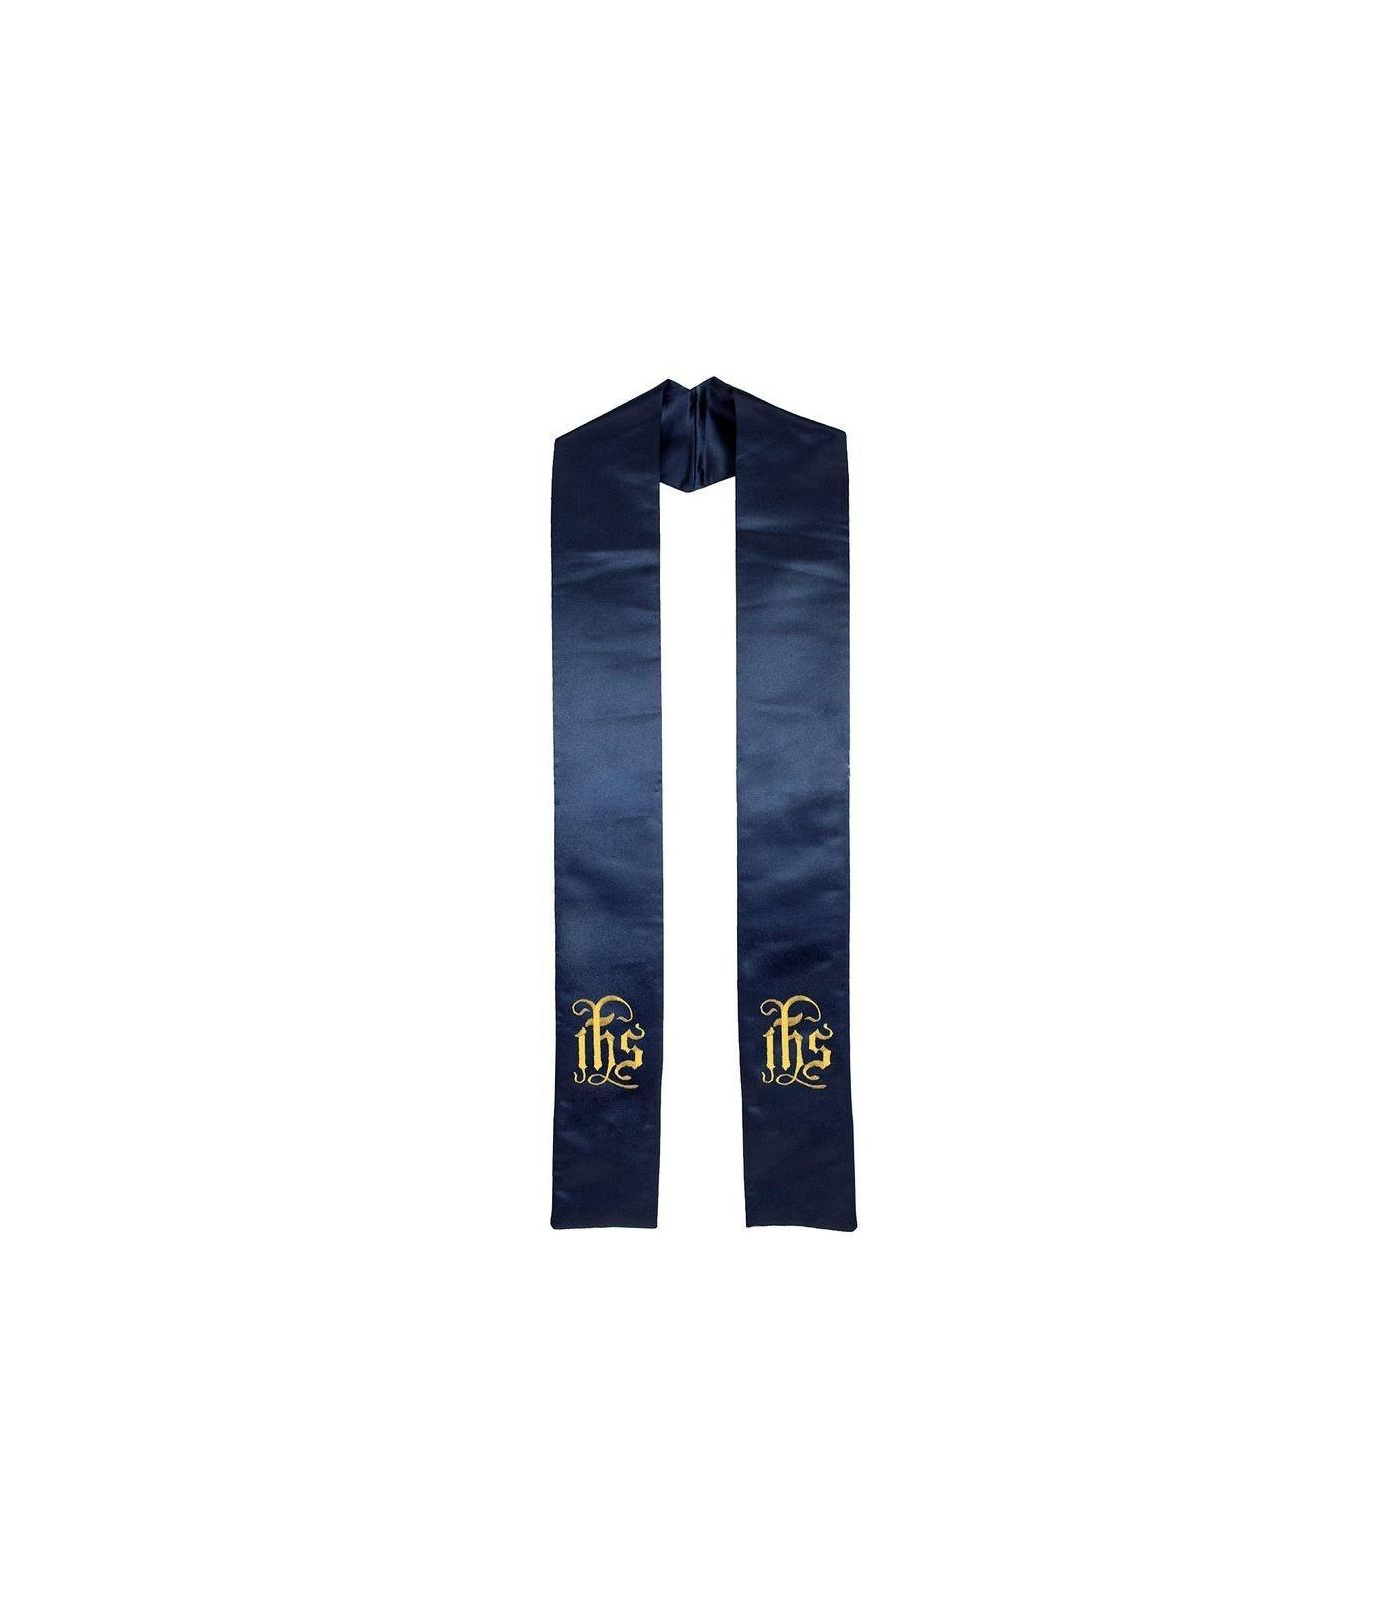 name_of_christ_symbol_-_in_his_service_-_navy_blue_1_500481176